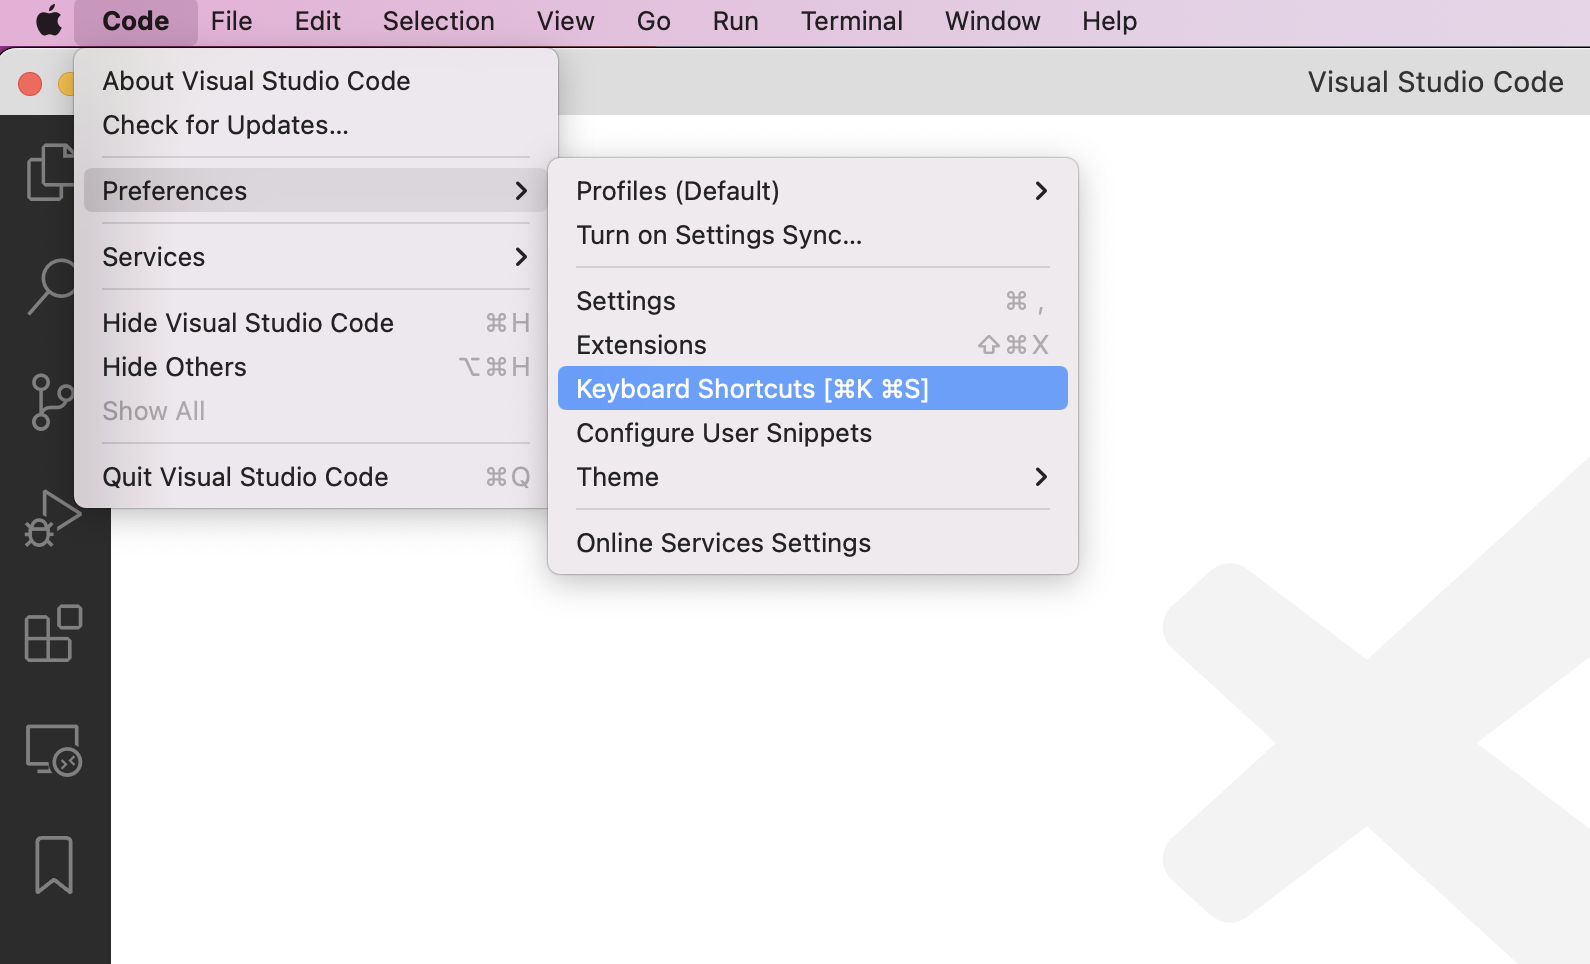 Screenshot of the menu bar in Visual Studio Code, with the "Code" menu expanded. In the "Preferences" sub-menu, the "Keyboard Shortcuts" option is highlighted in blue.